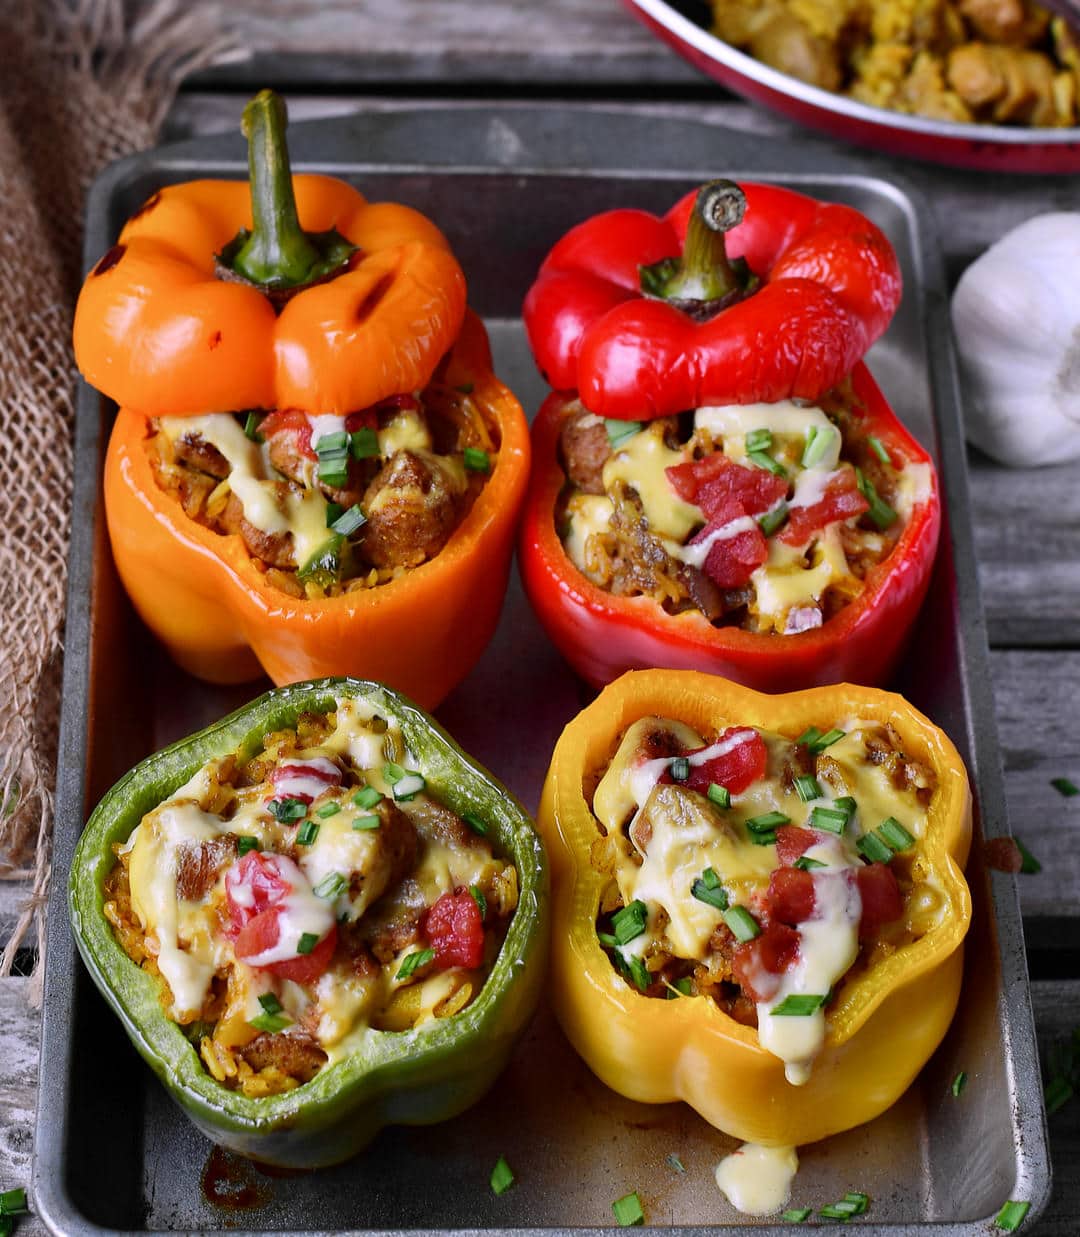 4 baked vegan stuffed bell peppers with plant-based cheese, rice, textured soy protein and veggies